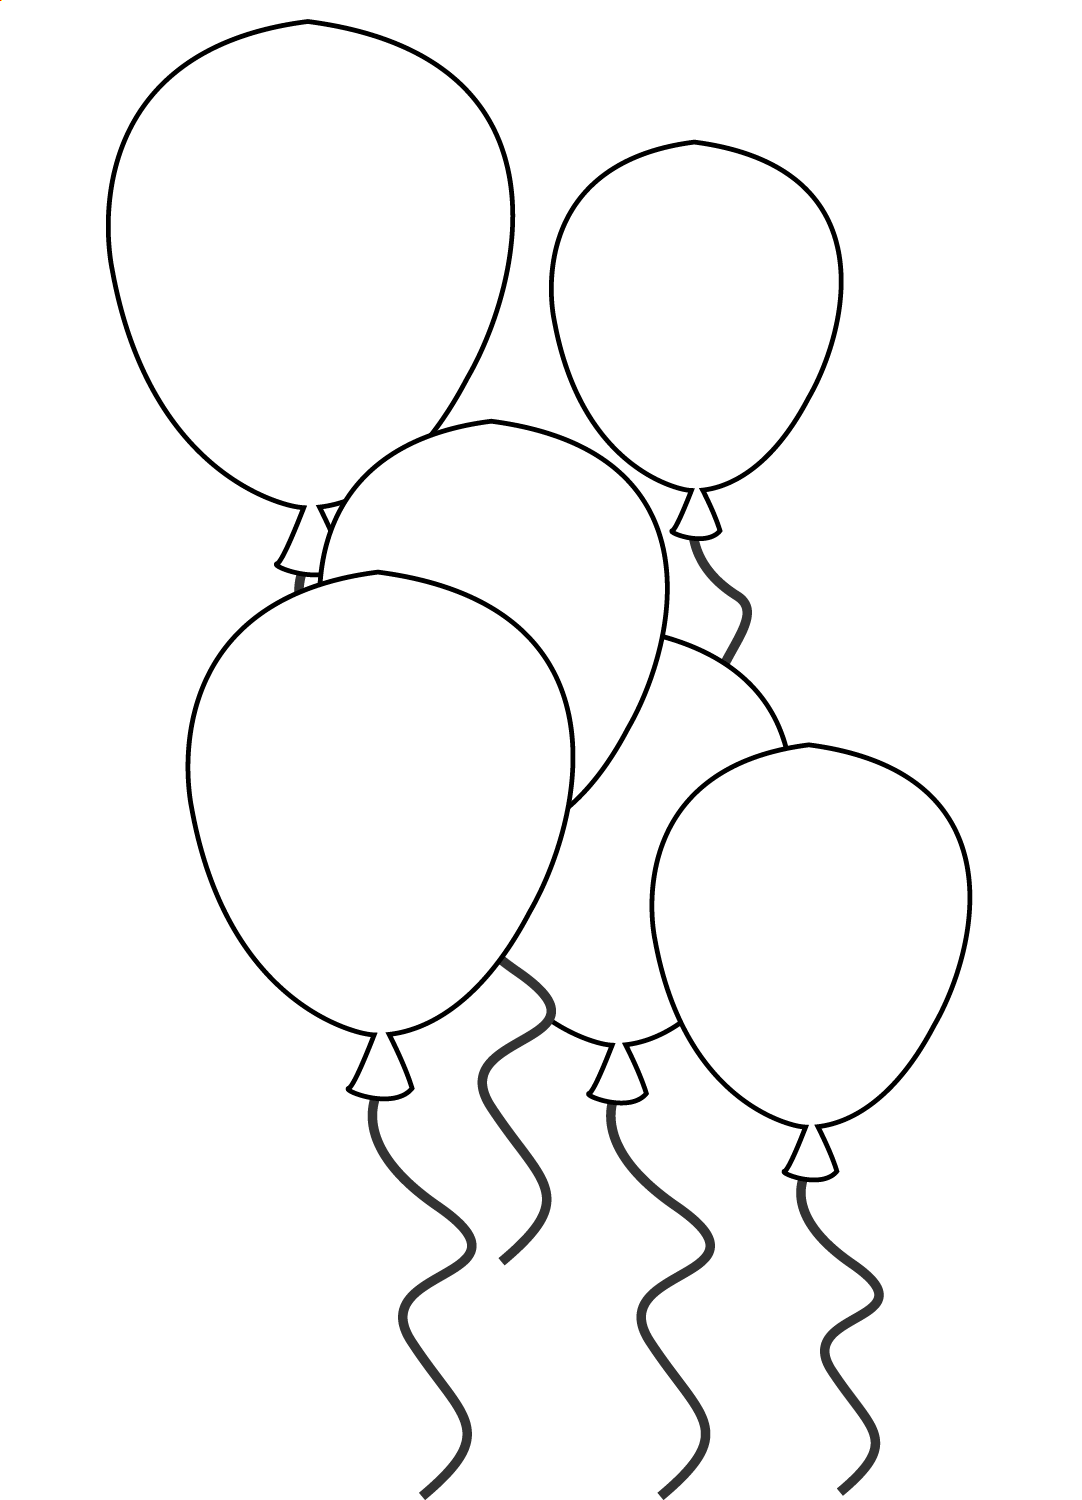 Five Balloons Coloring Page